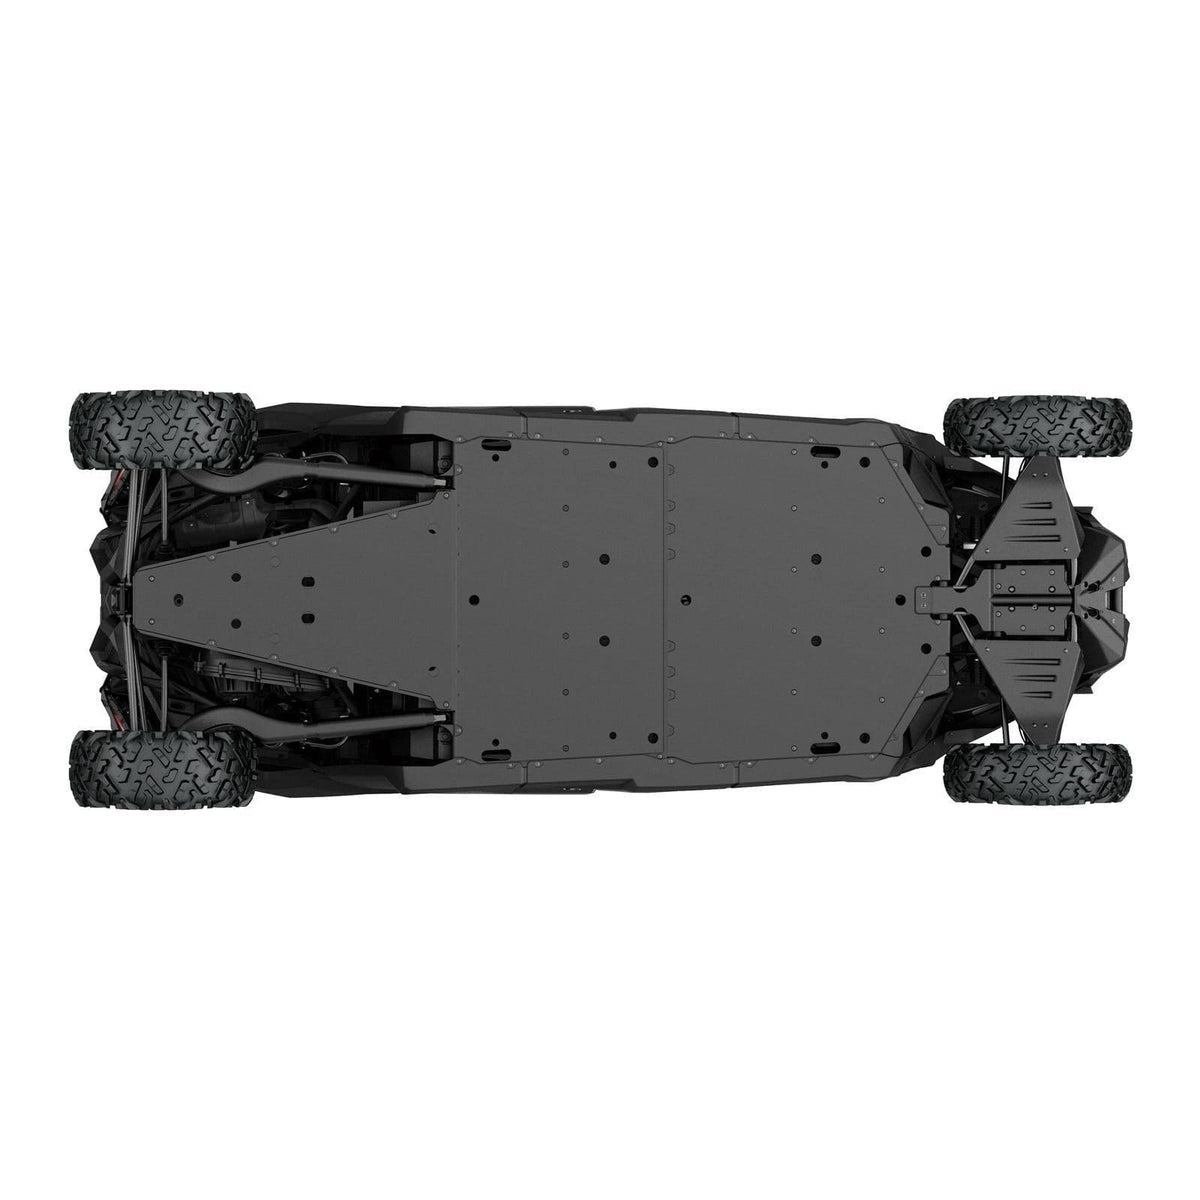 HMWPE Front Skid Plate - Factory Recreation